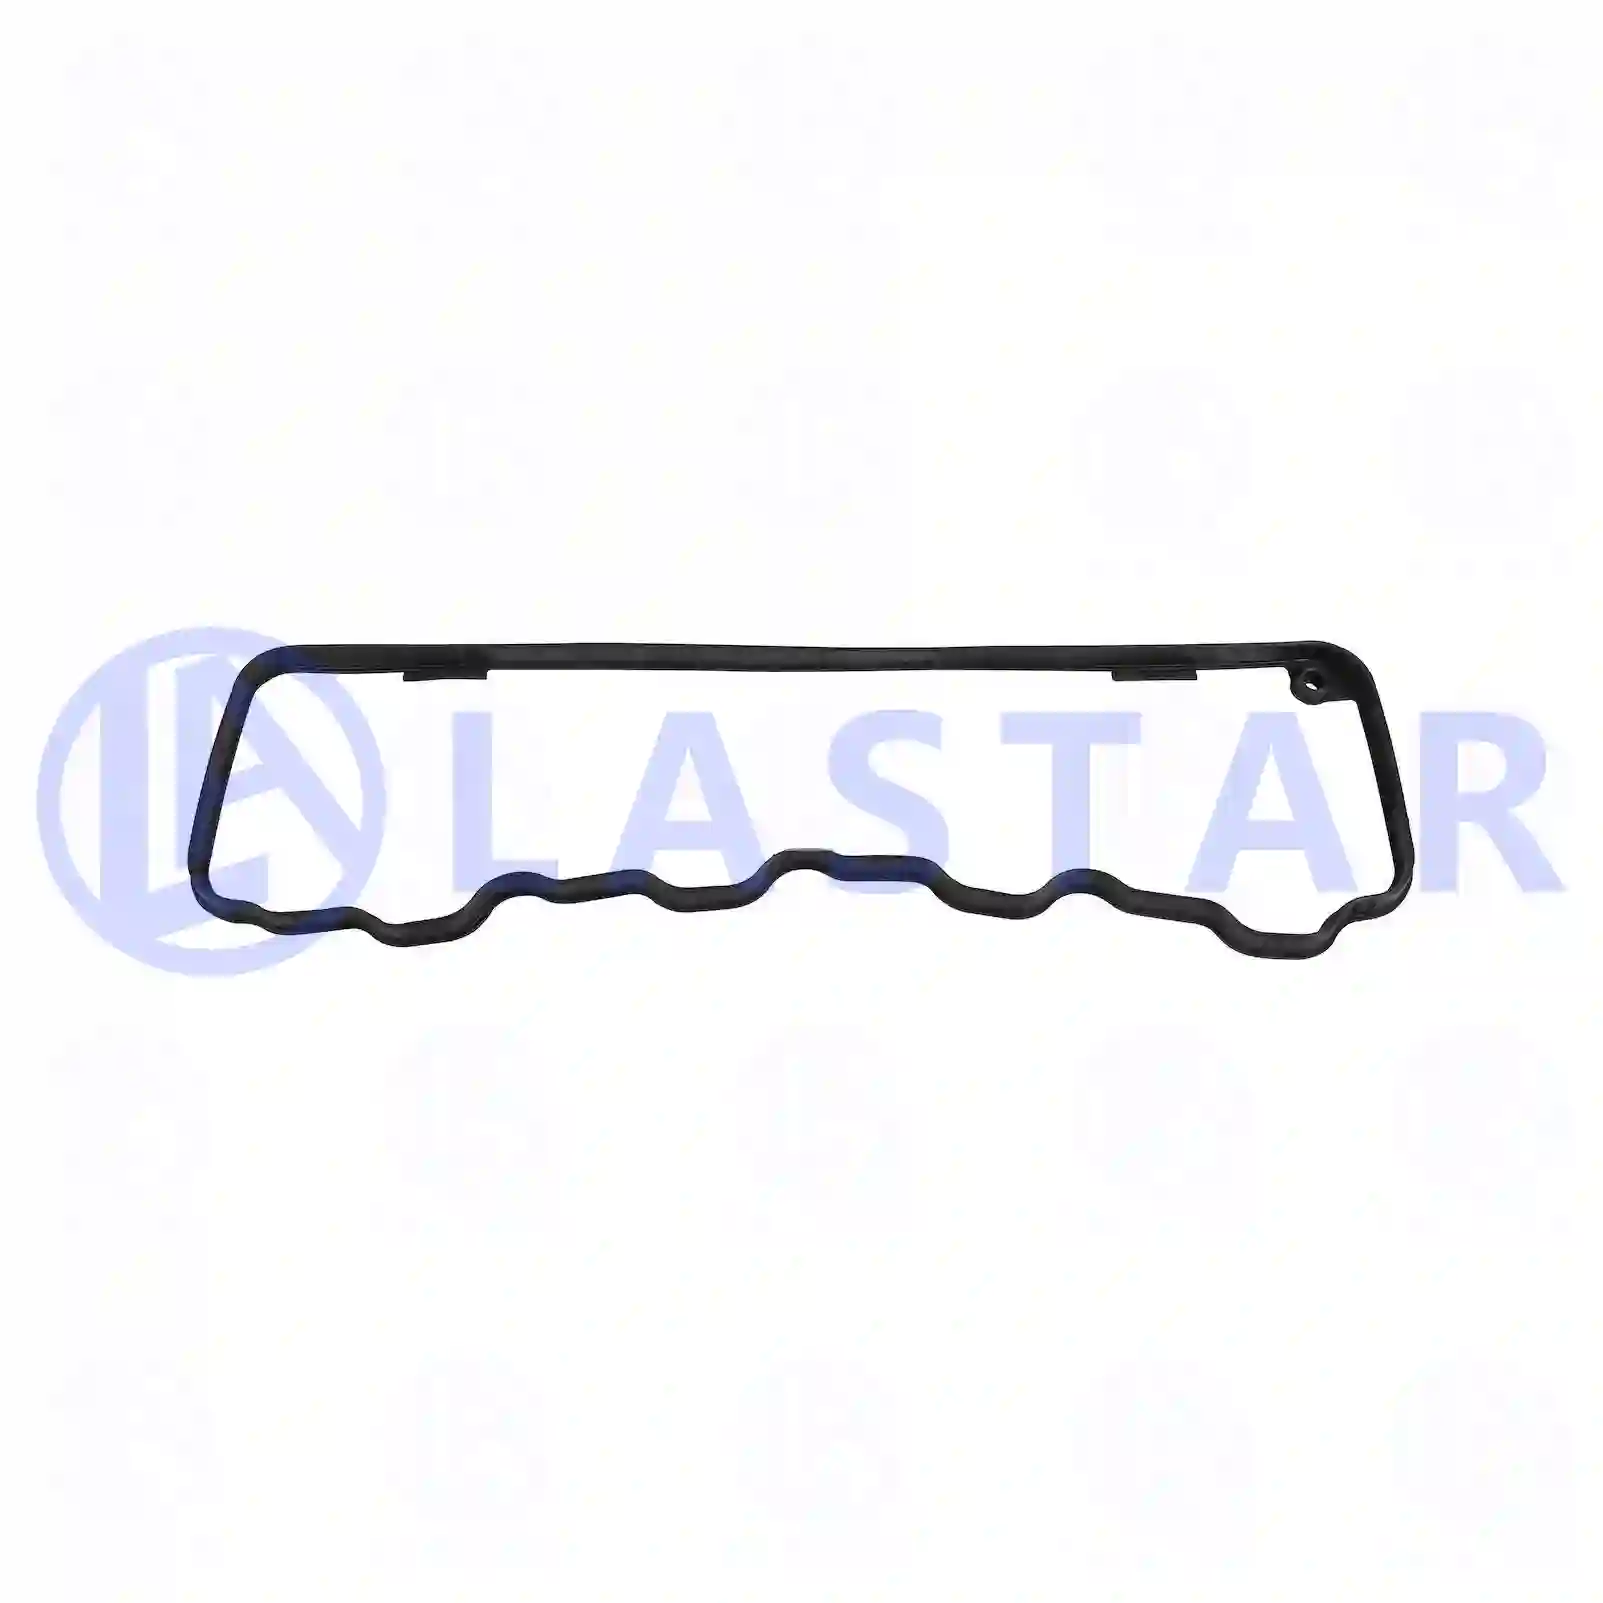 Gasket, cylinder head cover, 77701355, 0000160421, ZG01185-0008 ||  77701355 Lastar Spare Part | Truck Spare Parts, Auotomotive Spare Parts Gasket, cylinder head cover, 77701355, 0000160421, ZG01185-0008 ||  77701355 Lastar Spare Part | Truck Spare Parts, Auotomotive Spare Parts